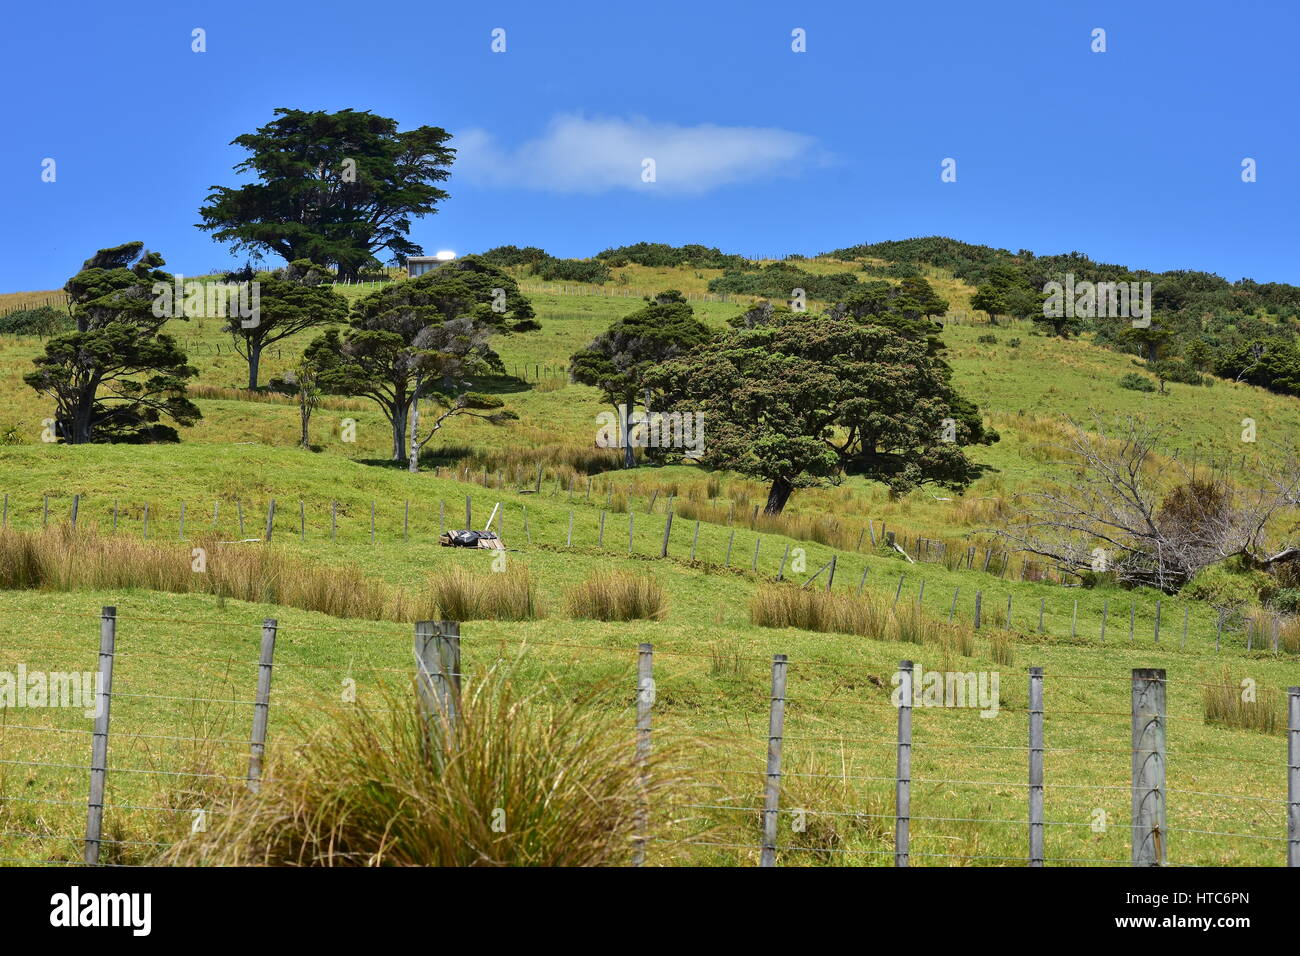 Typical farmland pastures divided by wire fences on flat hills in New Zealand countryside. Stock Photo